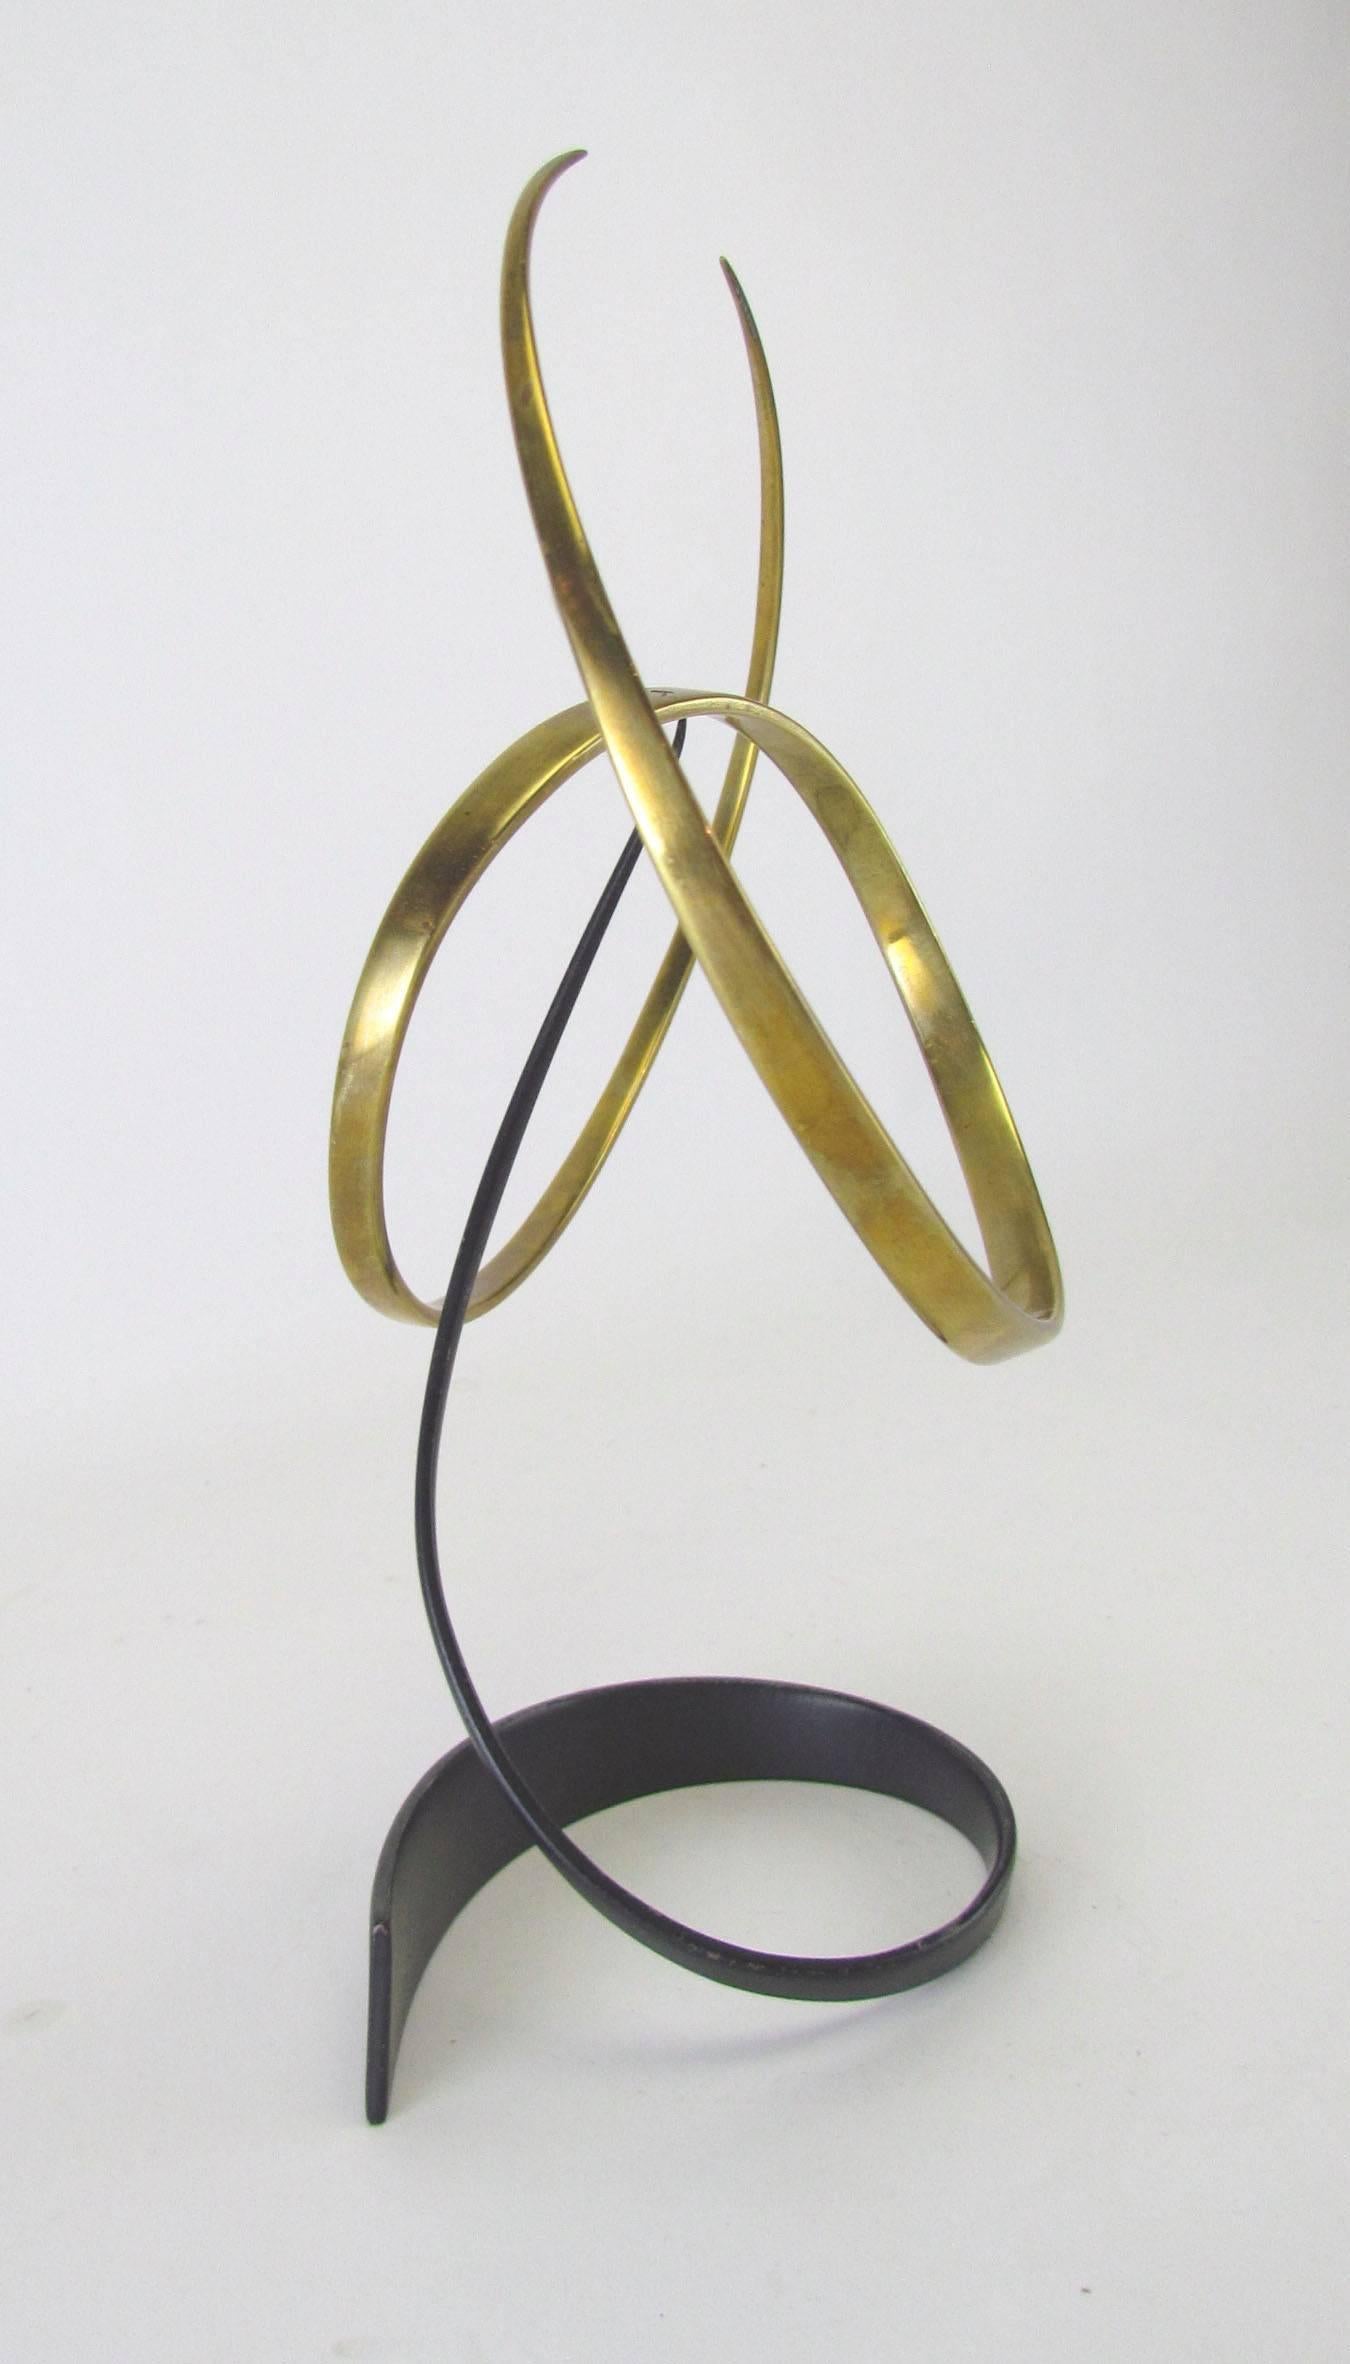 American Abstract Kinetic Brass and Bronze Table Sculpture, circa 1970s